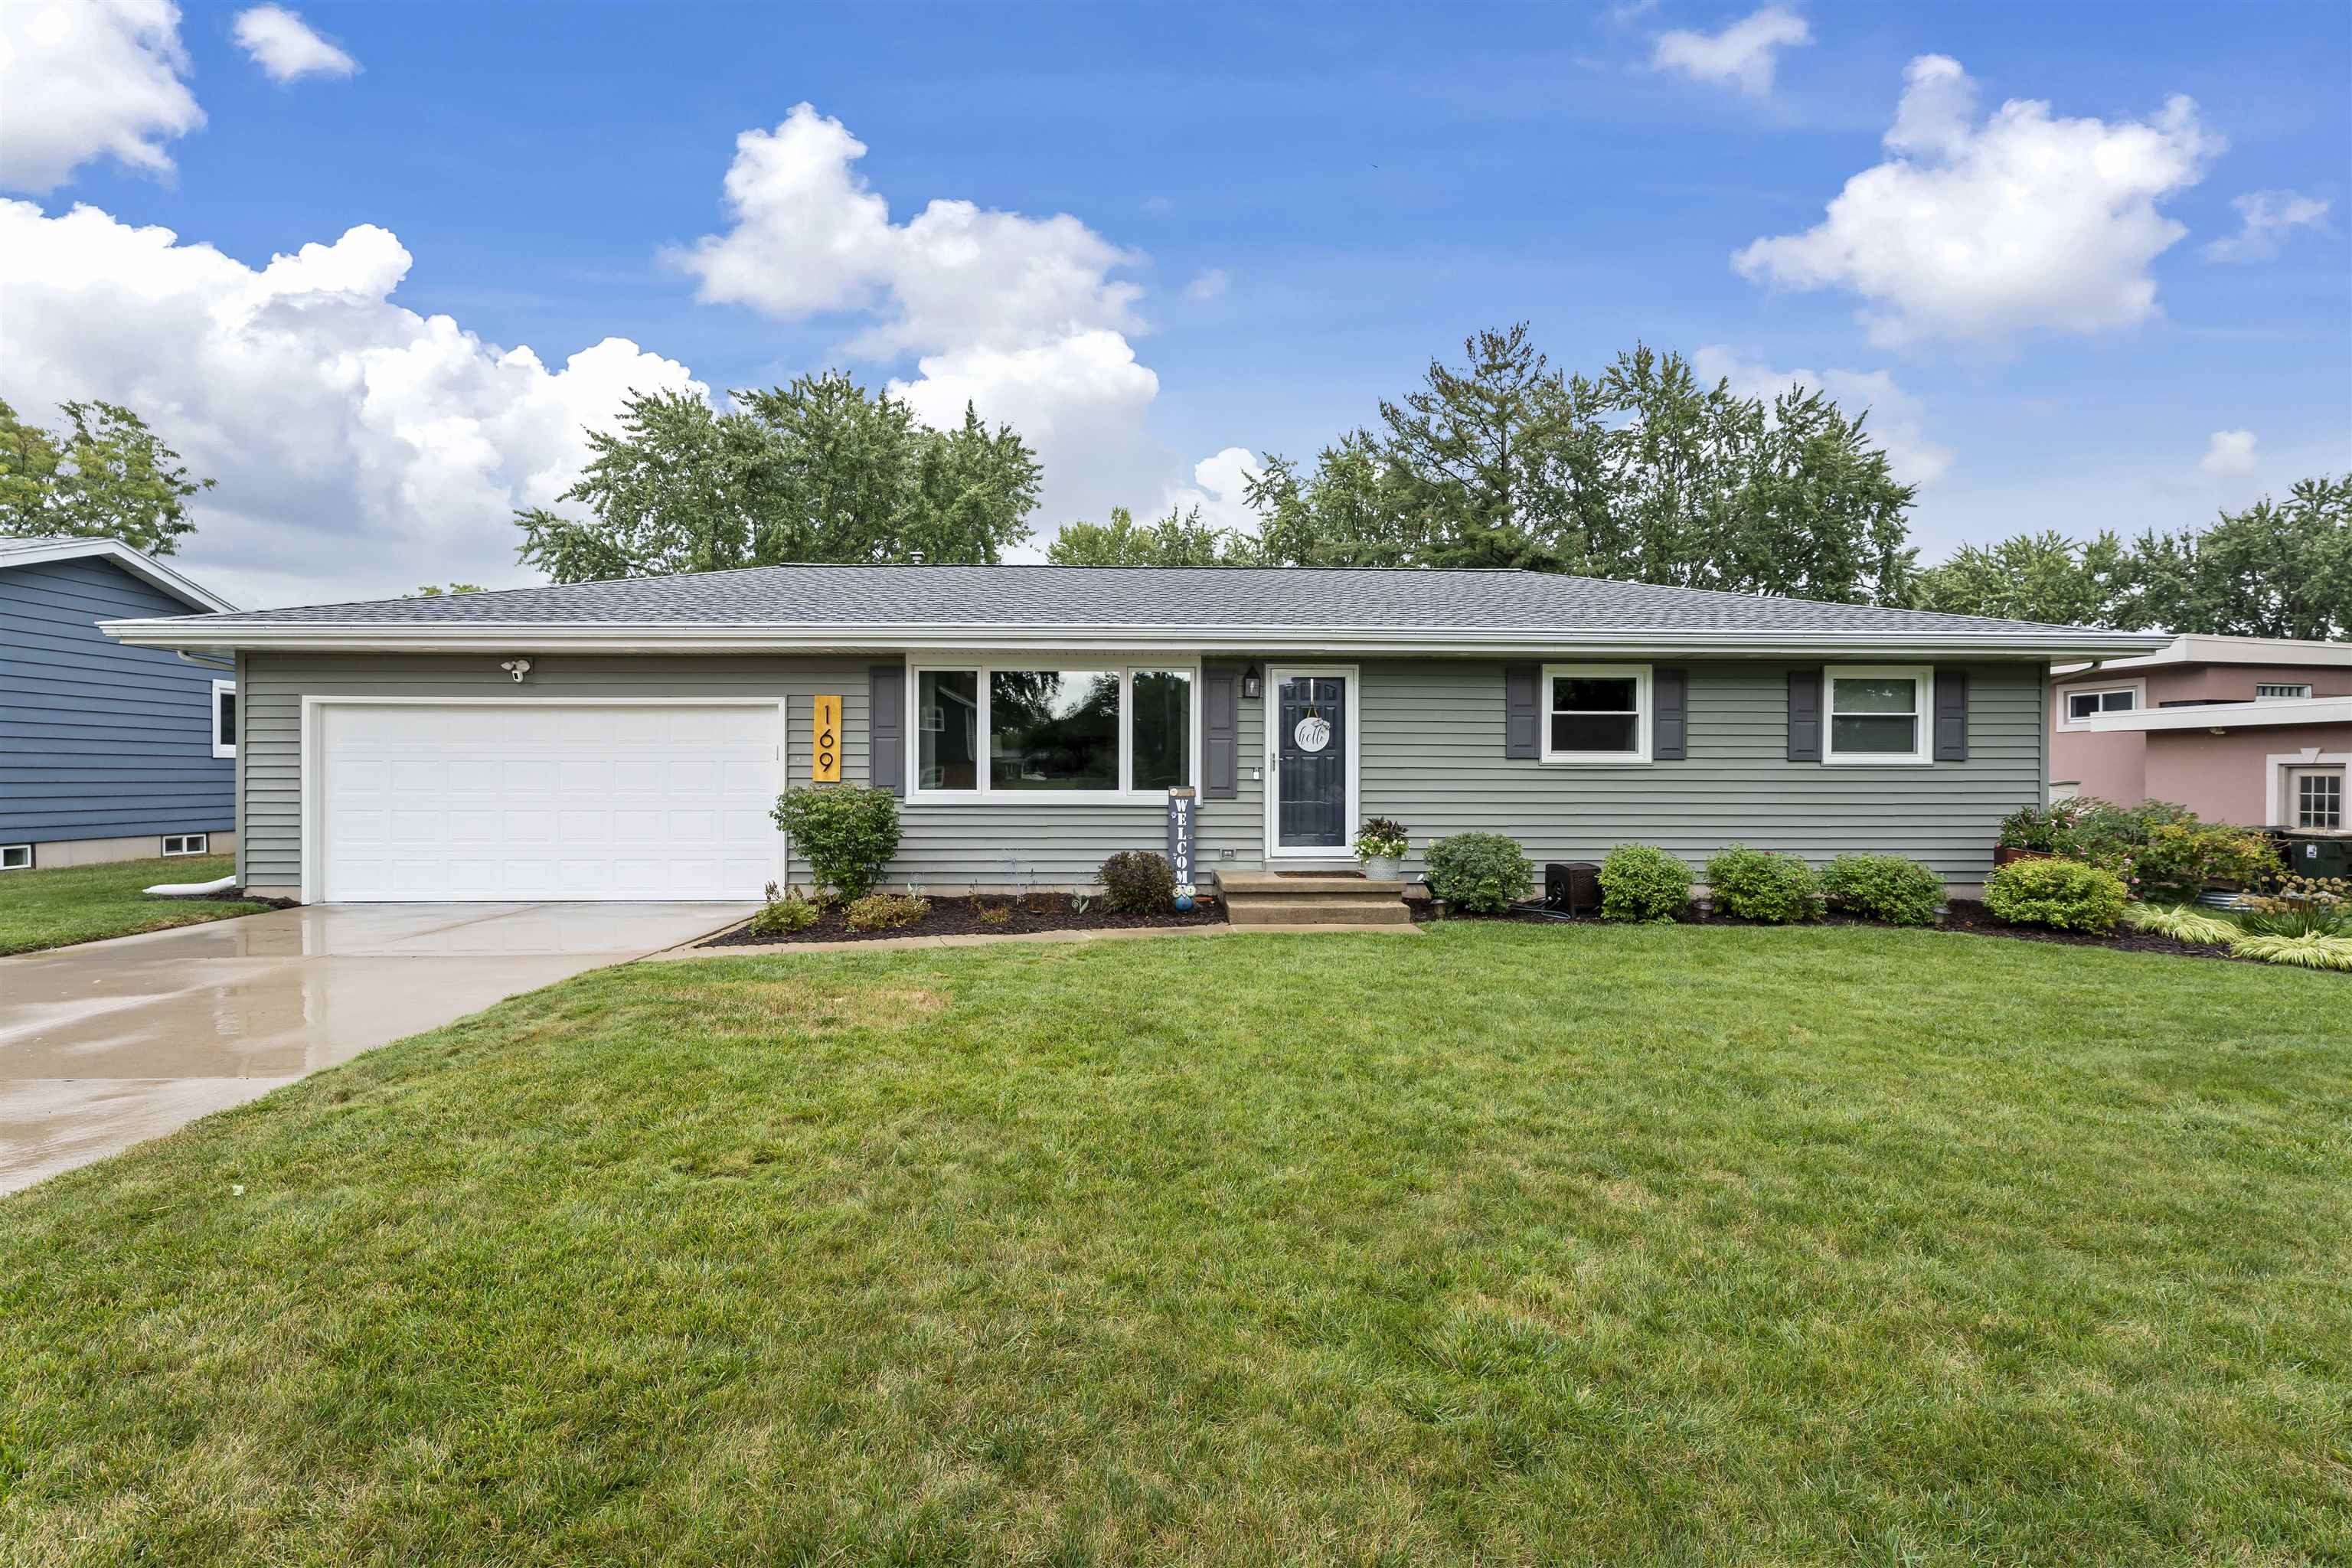 Beautifully updated 3 bed/2 bath ranch home in desirable Sun Prairie! Conveniently located minutes away from shopping & restaurants, this home is move-in ready! Late summer fun in the fenced-in backyard beckons, & the inviting patio area w/ pergola is perfect for fall BBQs & entertaining. Relax in the spacious family room w/ bright picture windows & chic LVP floors, or create delicious memories in the updated kitchen w/quartz counters. The prim. suite ft. a spaciously remodeled WIC w/ built-ins, while the additional main level bedrooms work great for either home office or traditional use. Enjoy the added living space & watch the big game in the tastefully finished basement w/ rec room & bar area! Windows 2022. H2O softener 2022. 200 amp panel 2021. Garage epoxy 2021. Roof 2012